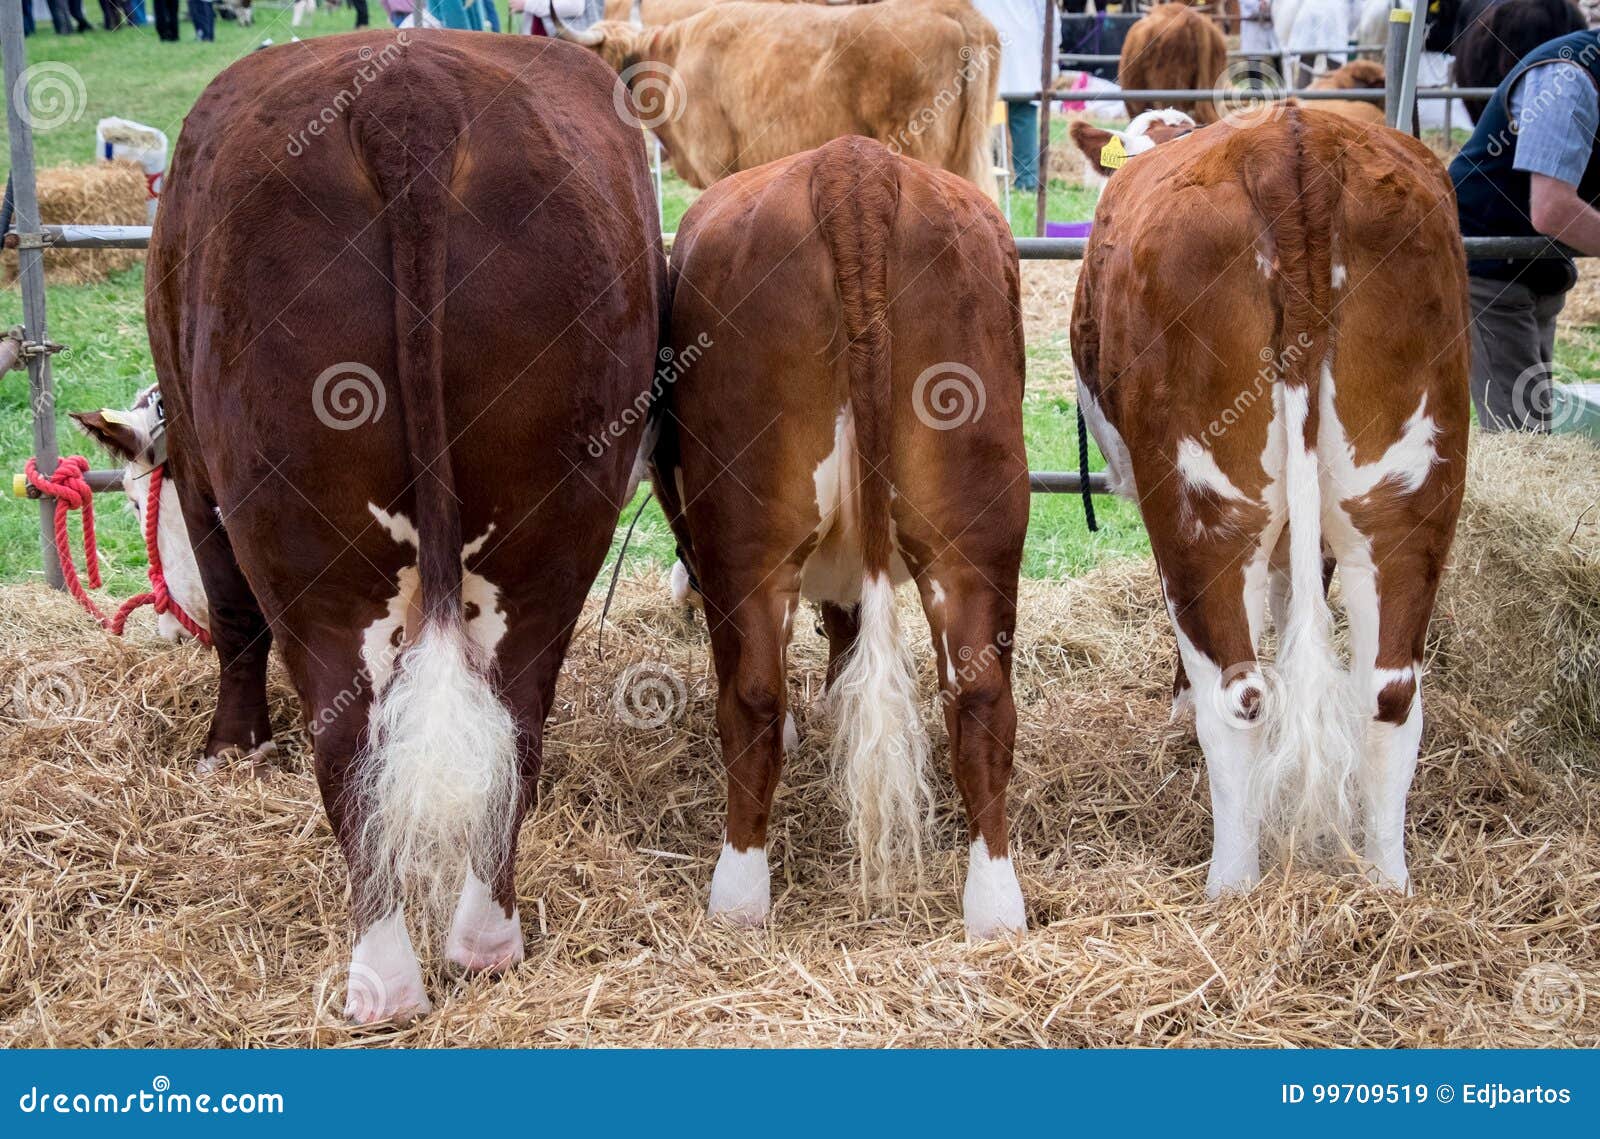 show cattle